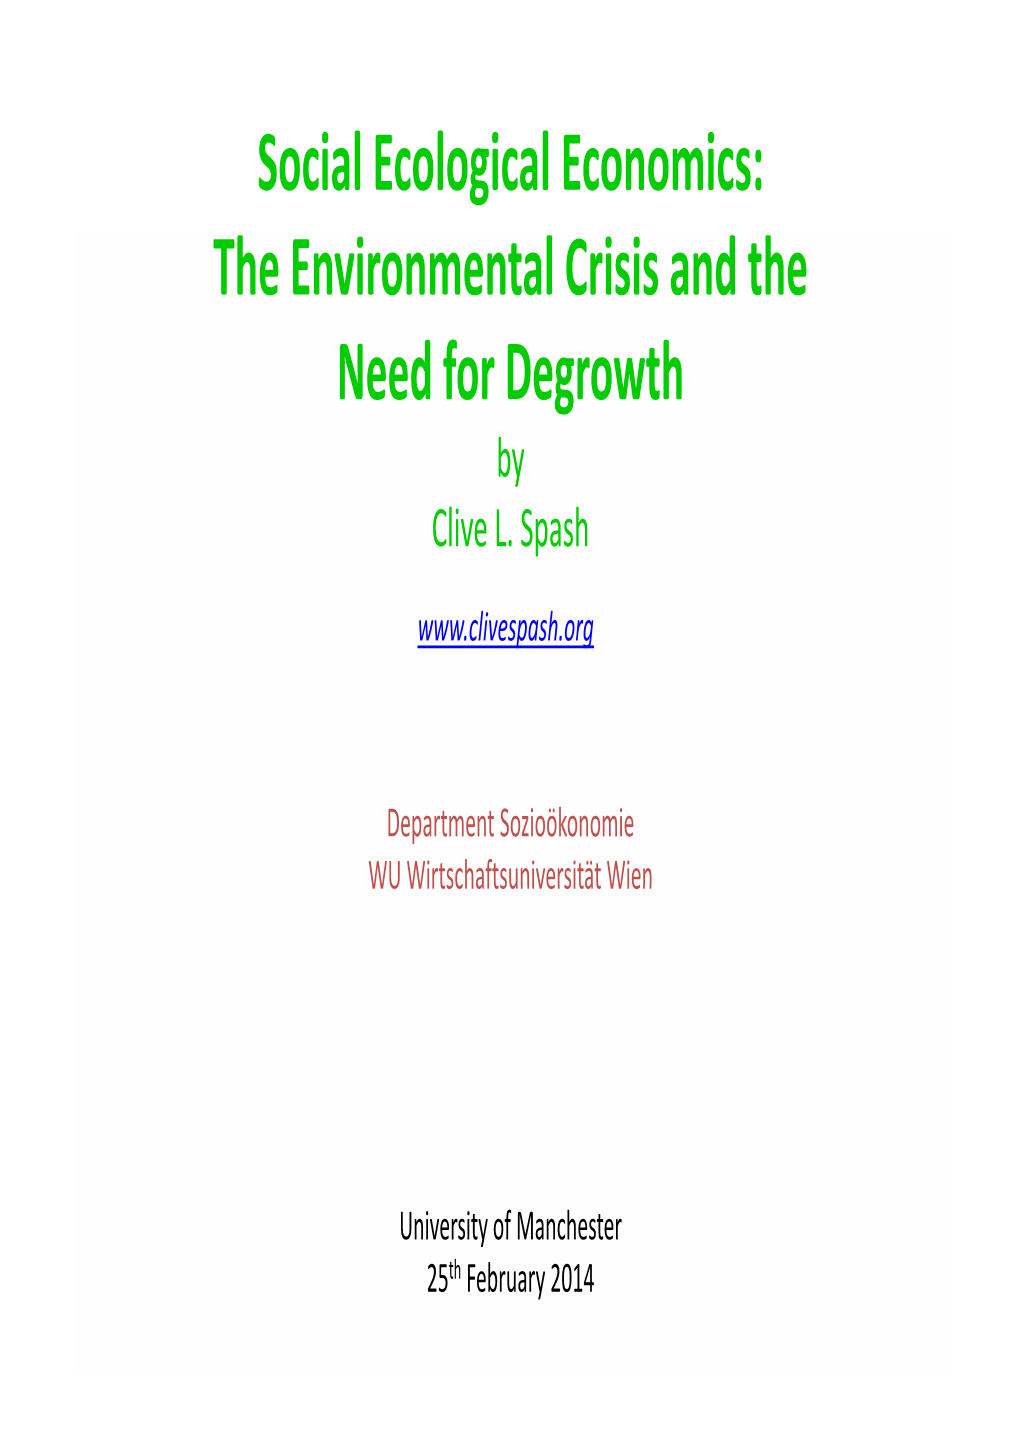 Social Ecological Economics: the Environmental Crisis and the Need for Degrowth by Clive L